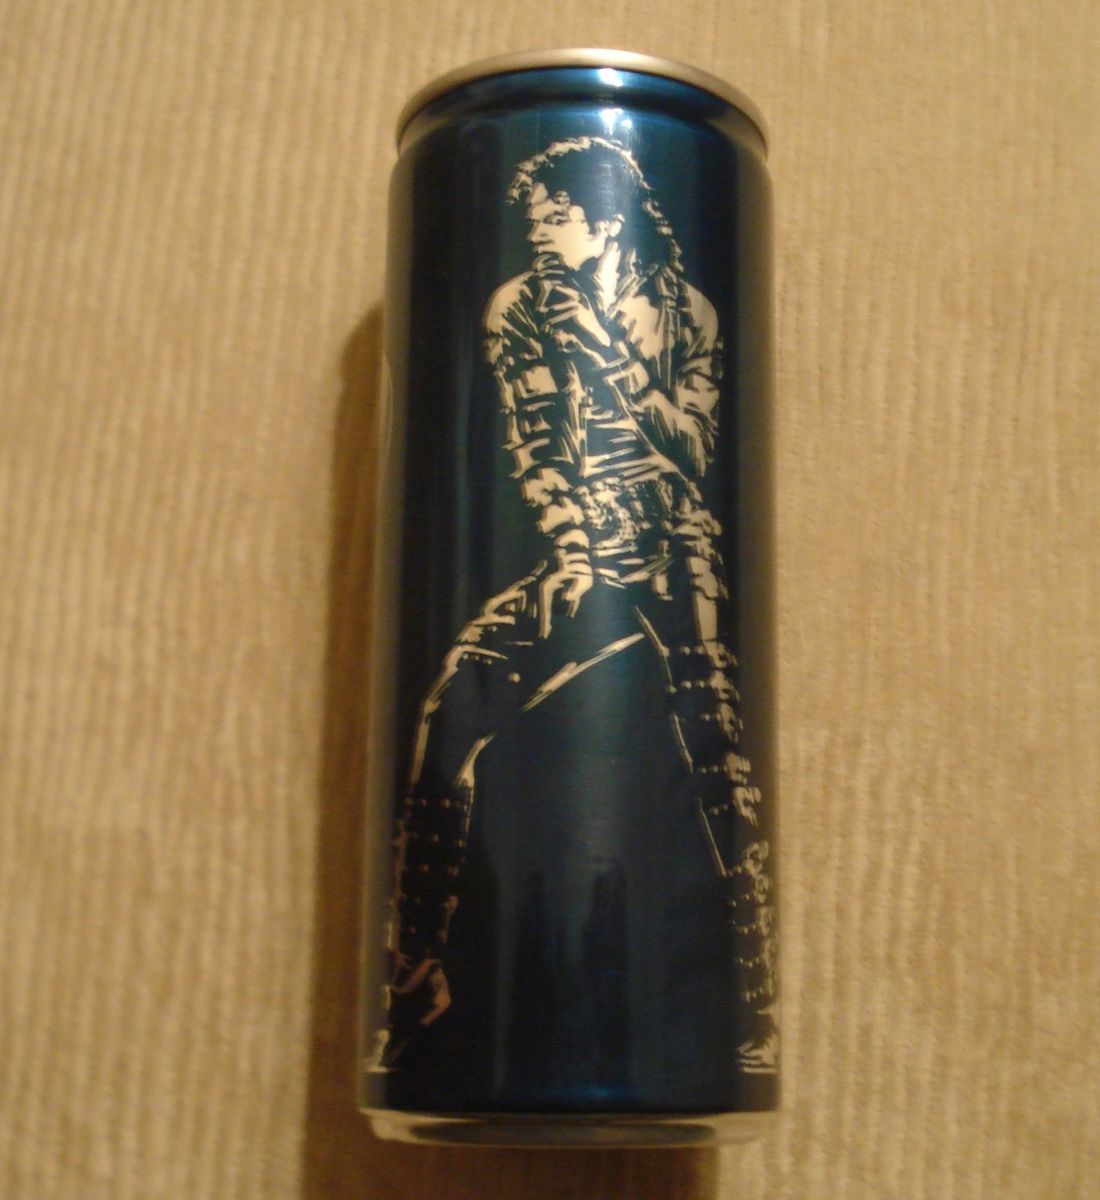  LIMITED EDITION KING OF POP MICHAEL JACKSON EMPTY CAN MIDDLE EAST